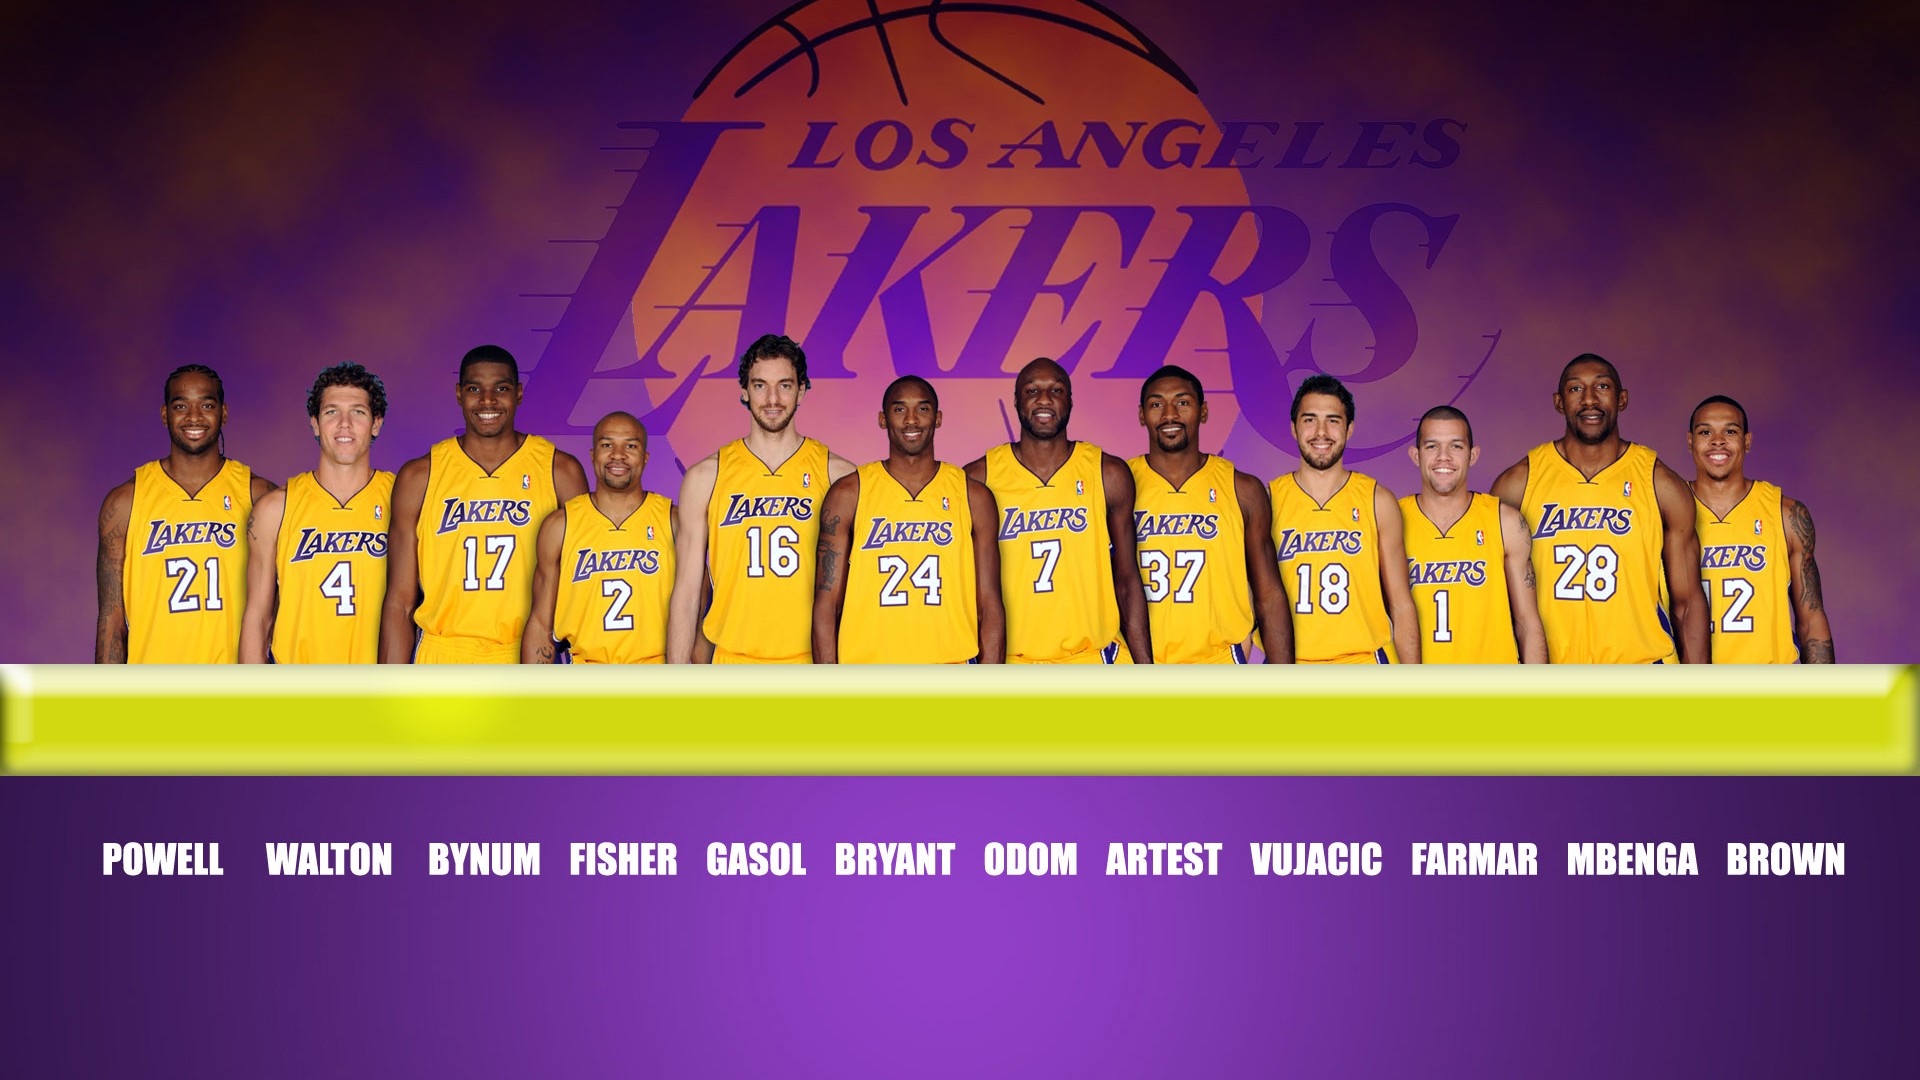 Los Angeles Lakers For Mac Wallpaper With Image Dimensions - Los Angeles Lakers - HD Wallpaper 